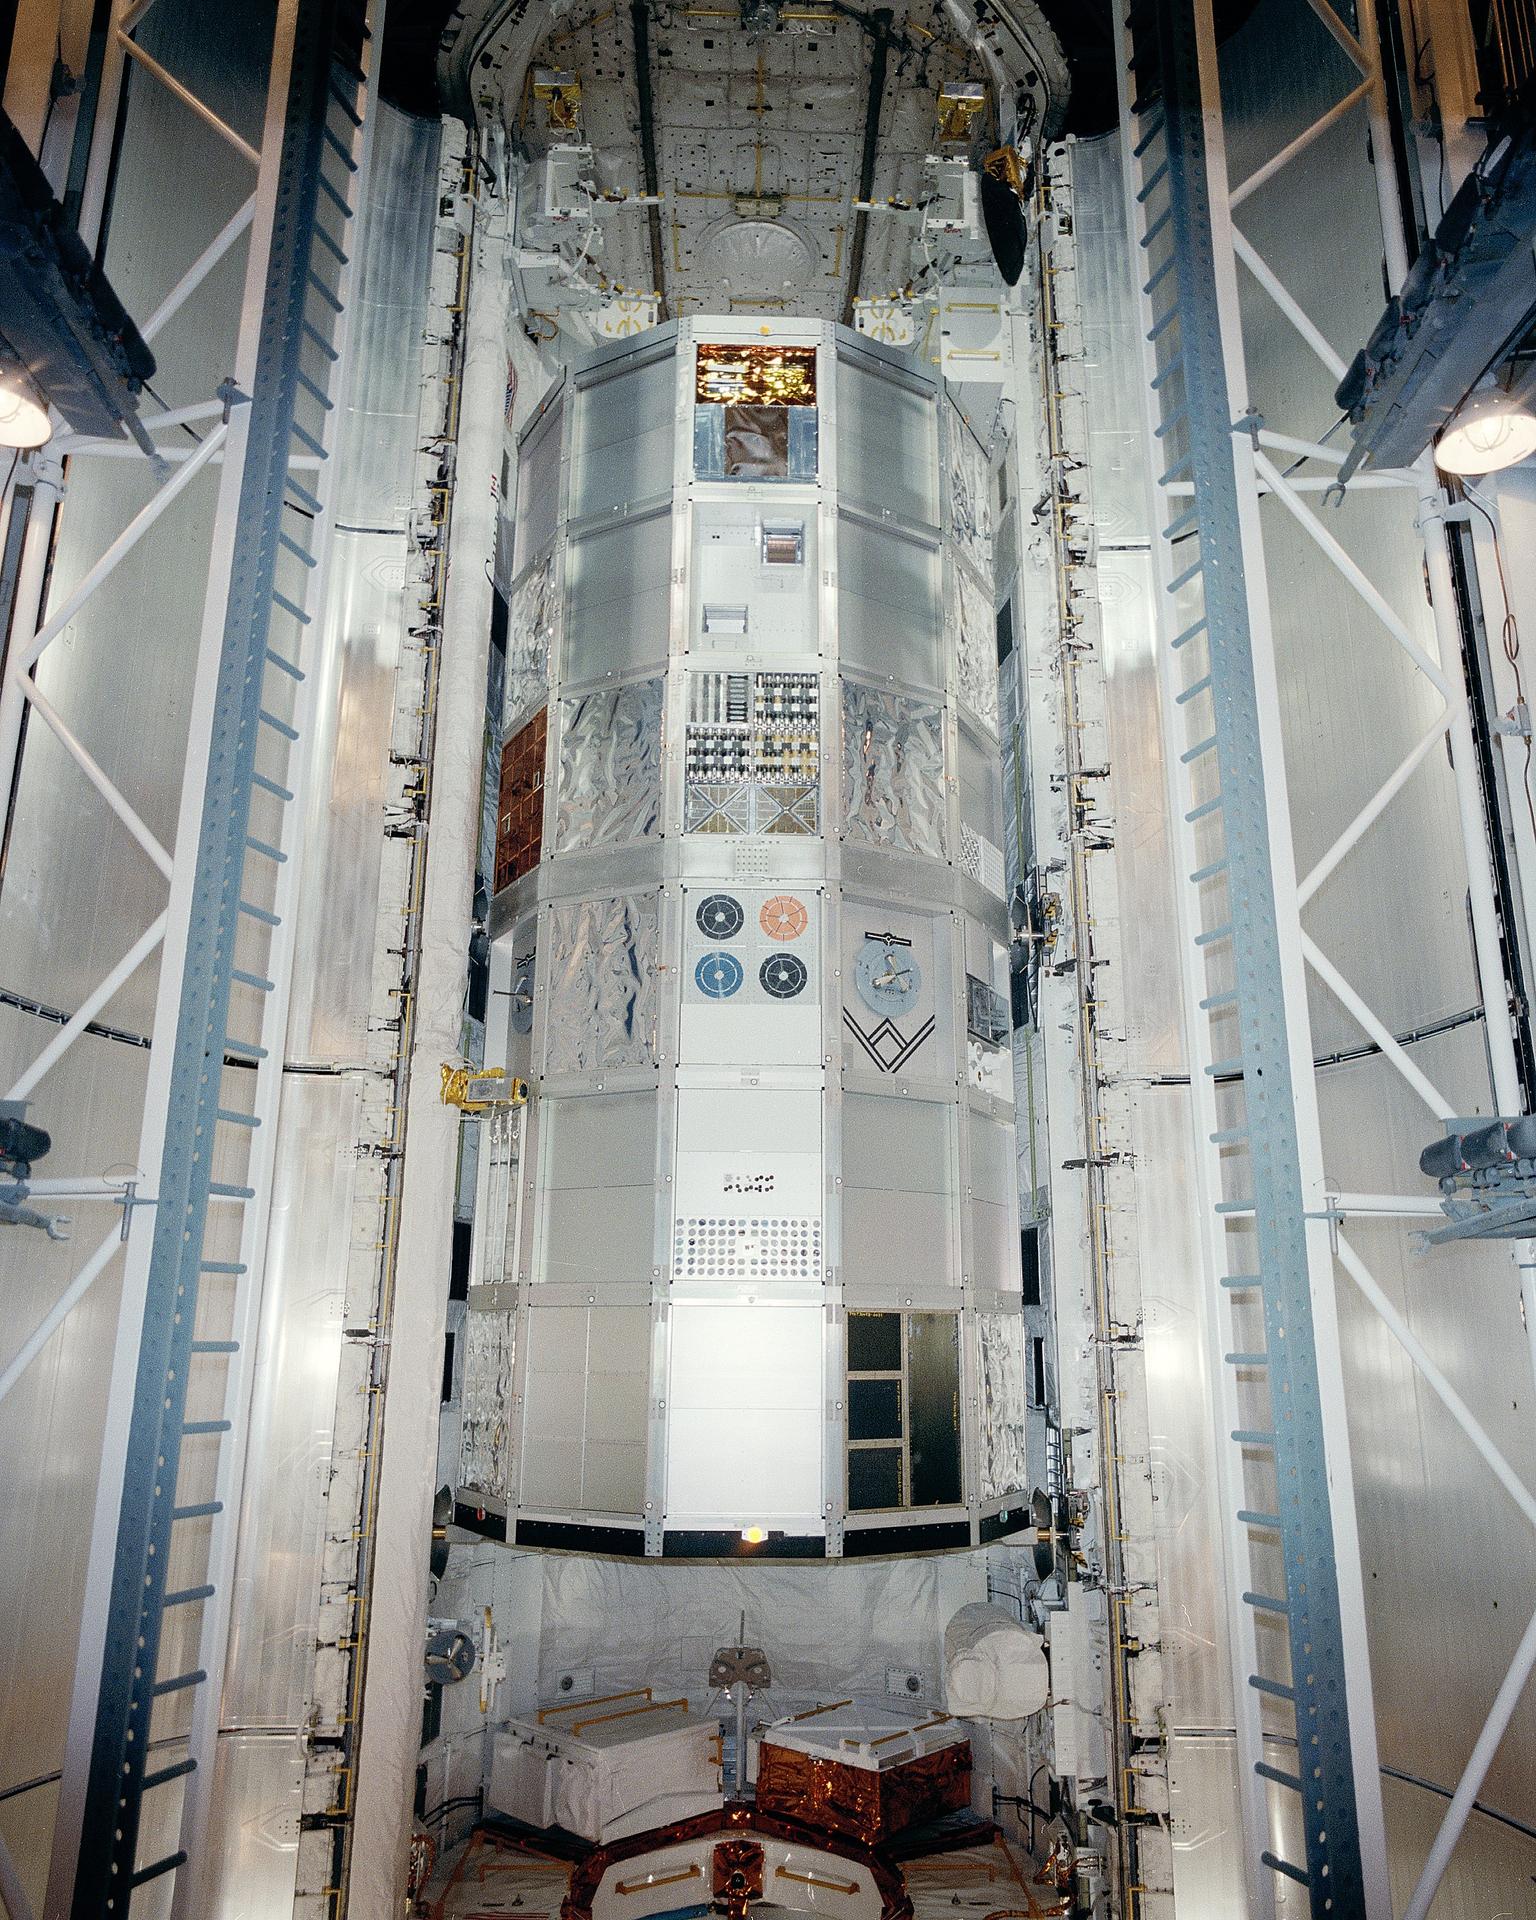 Challenger’s payload bay for STS-41C